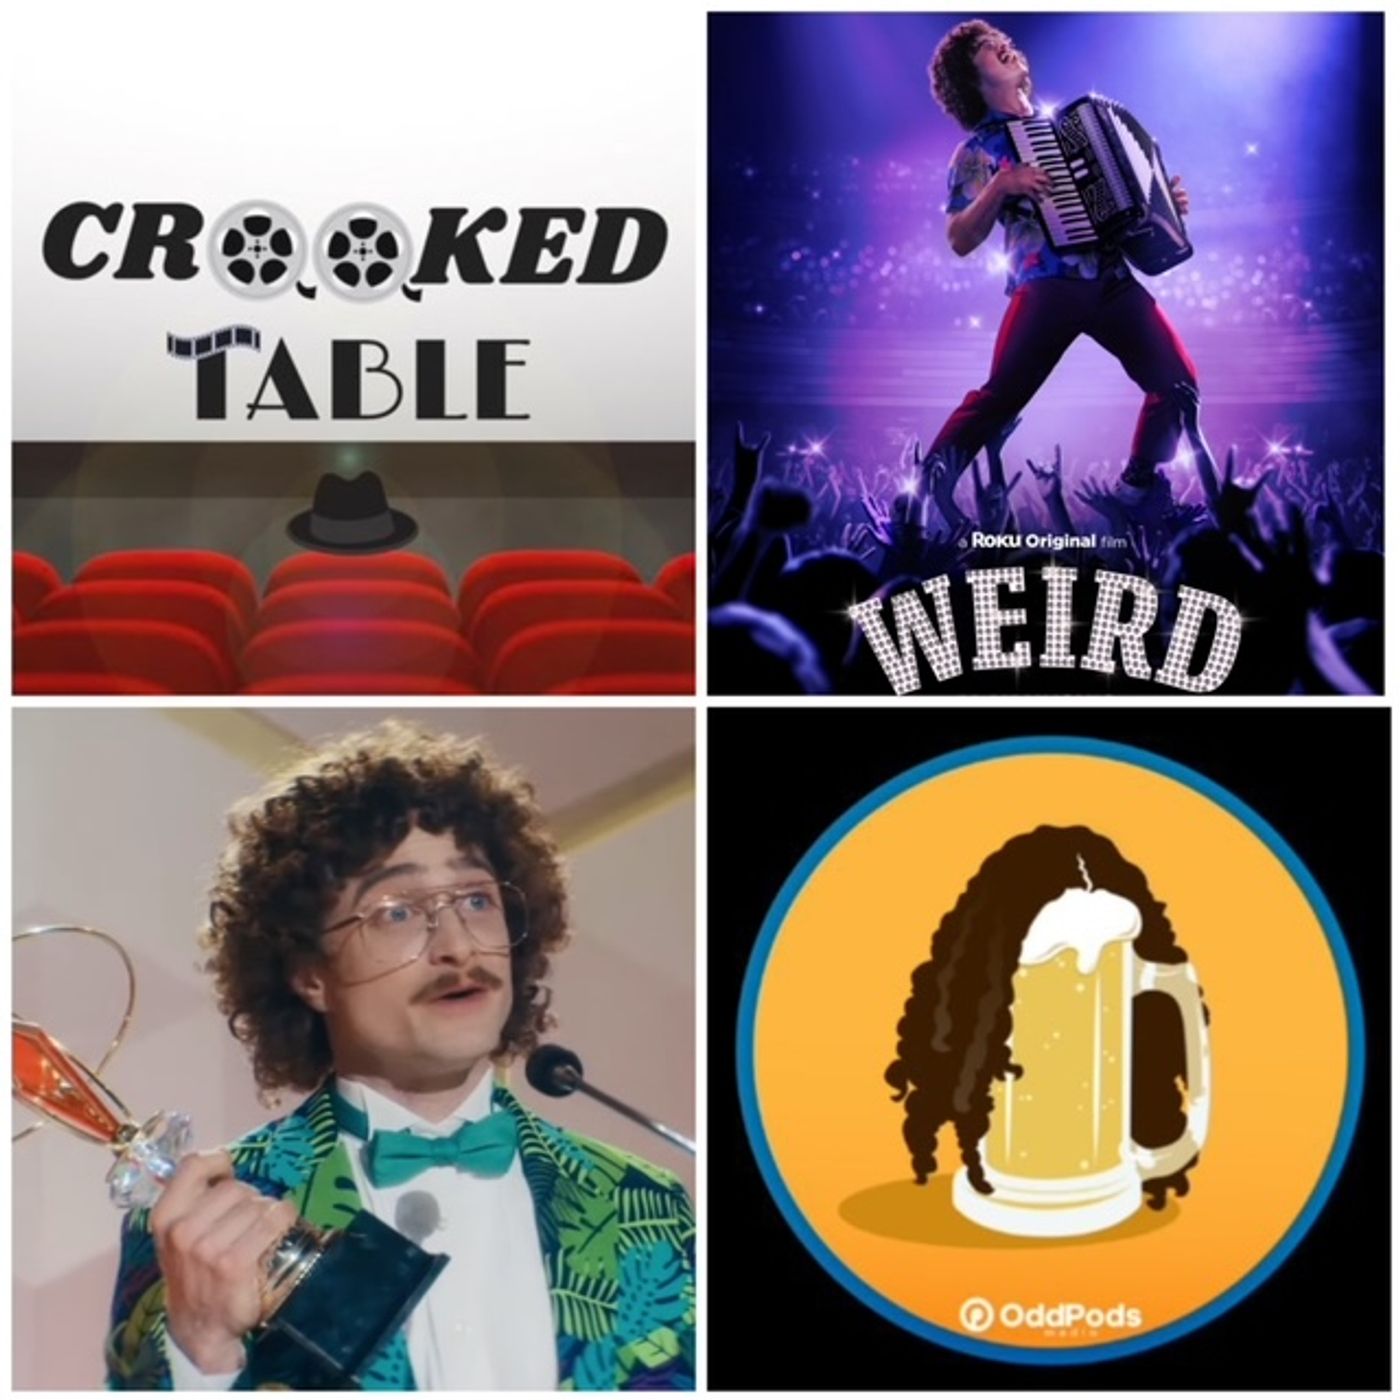 Very Special Episode: WEIRD The Al Yankovic Story Pre-Party ft. Robert from Crooked Table